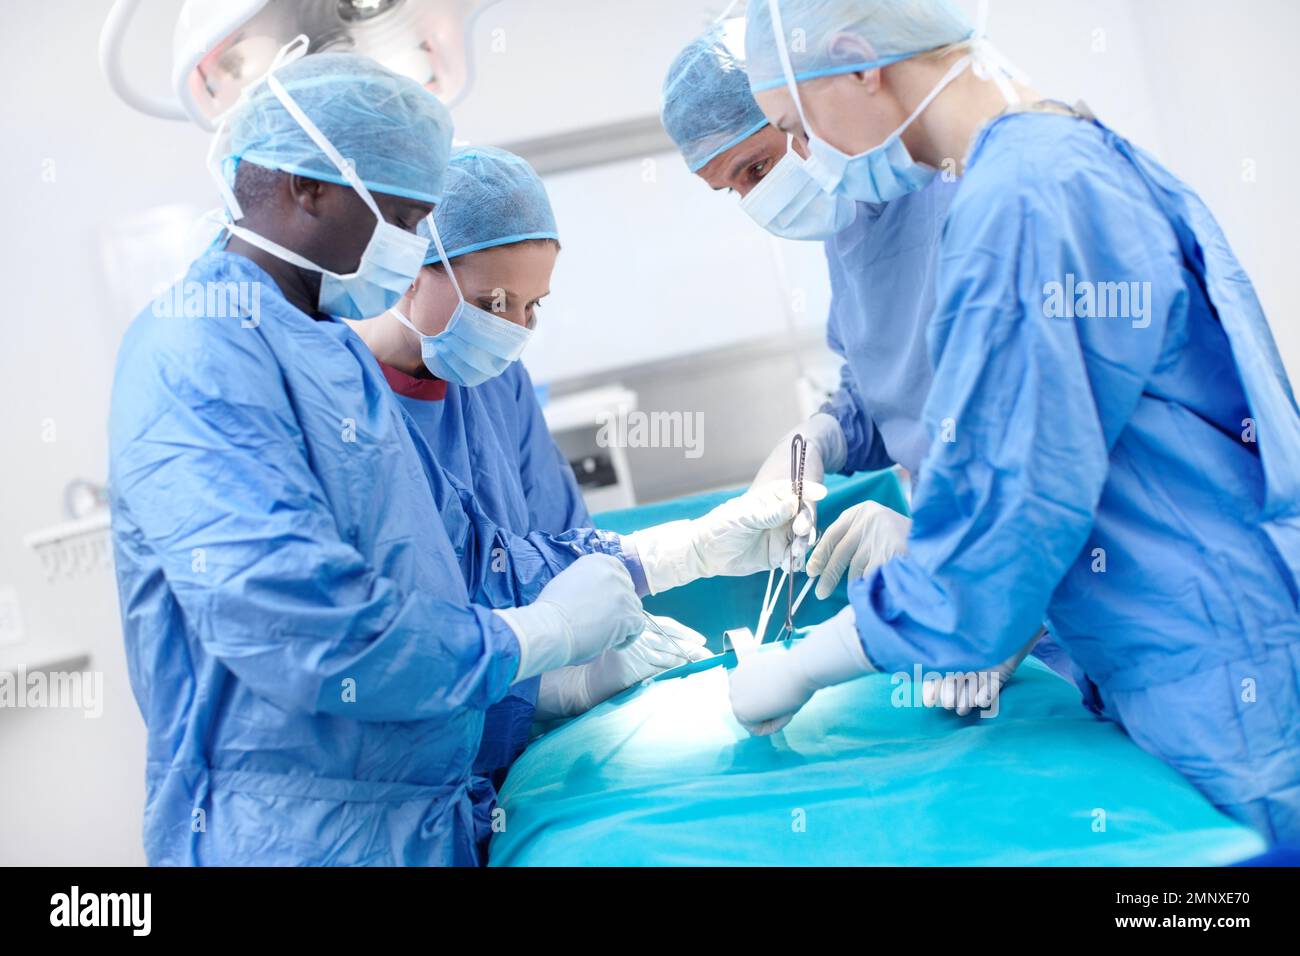 Experts in Anatomy. Surgical doctors operating on a patient in a hospital. Stock Photo